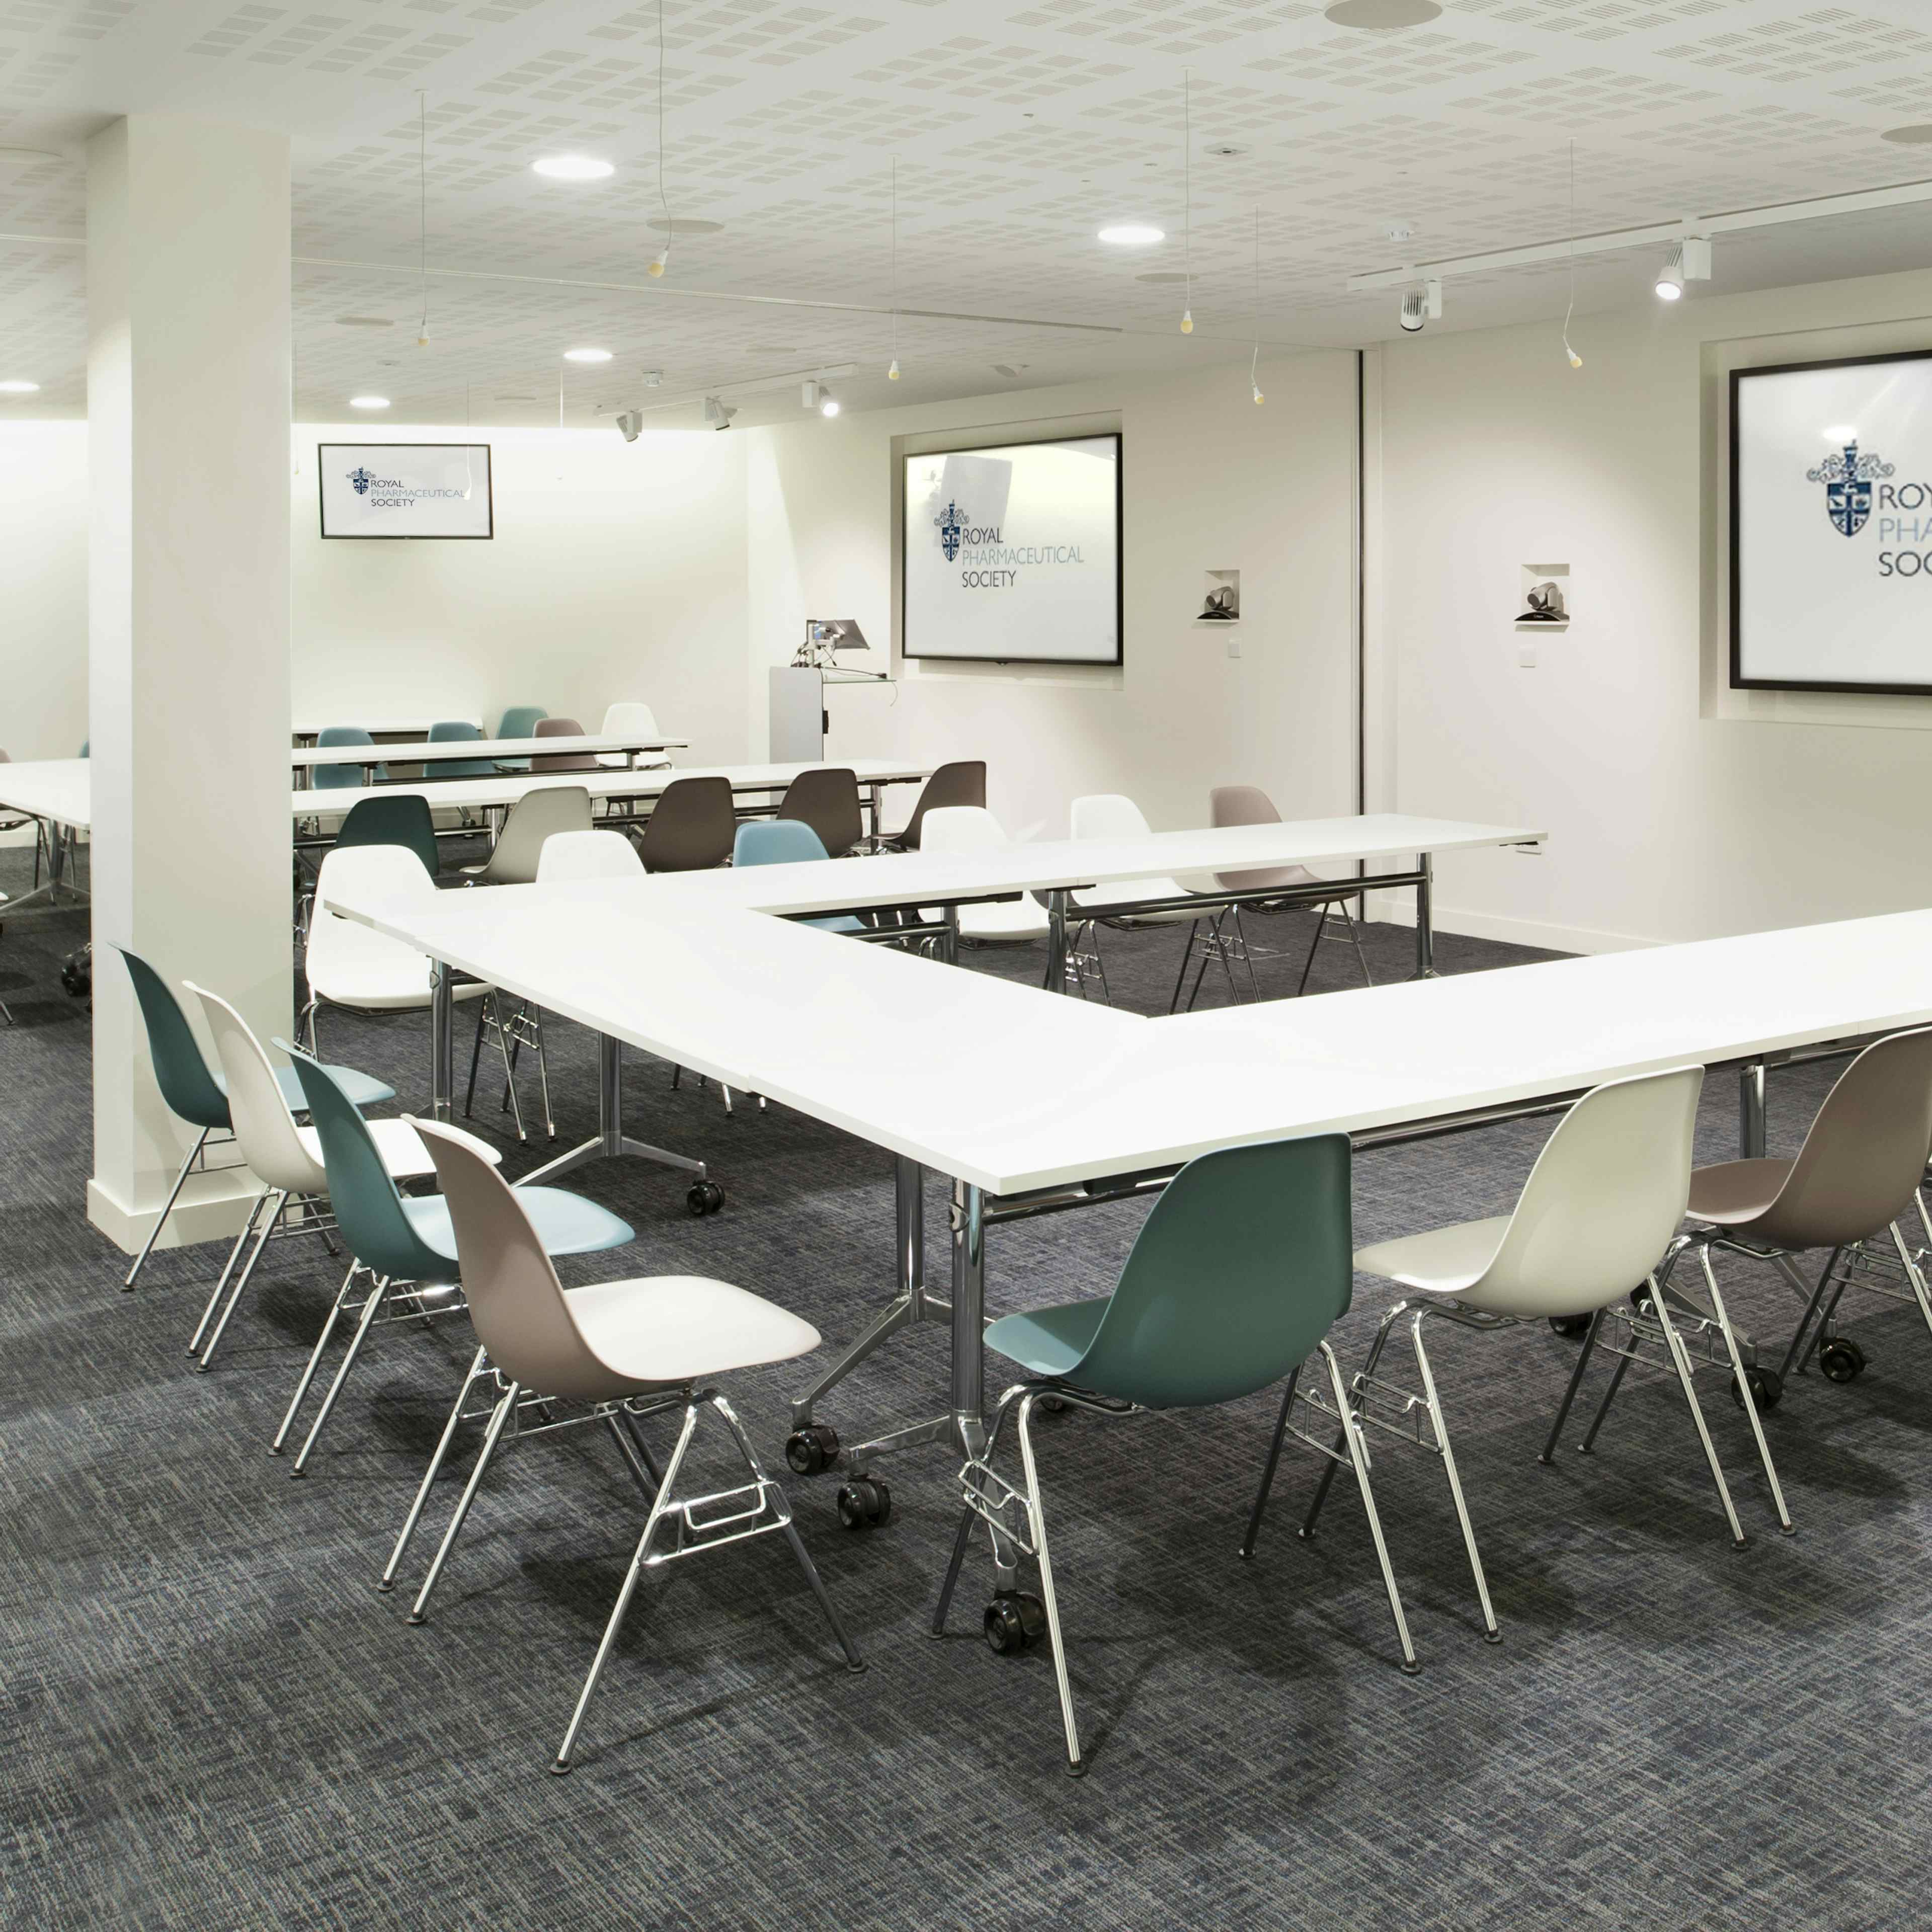 The Royal Pharmaceutical Society - RPS Suite image 3